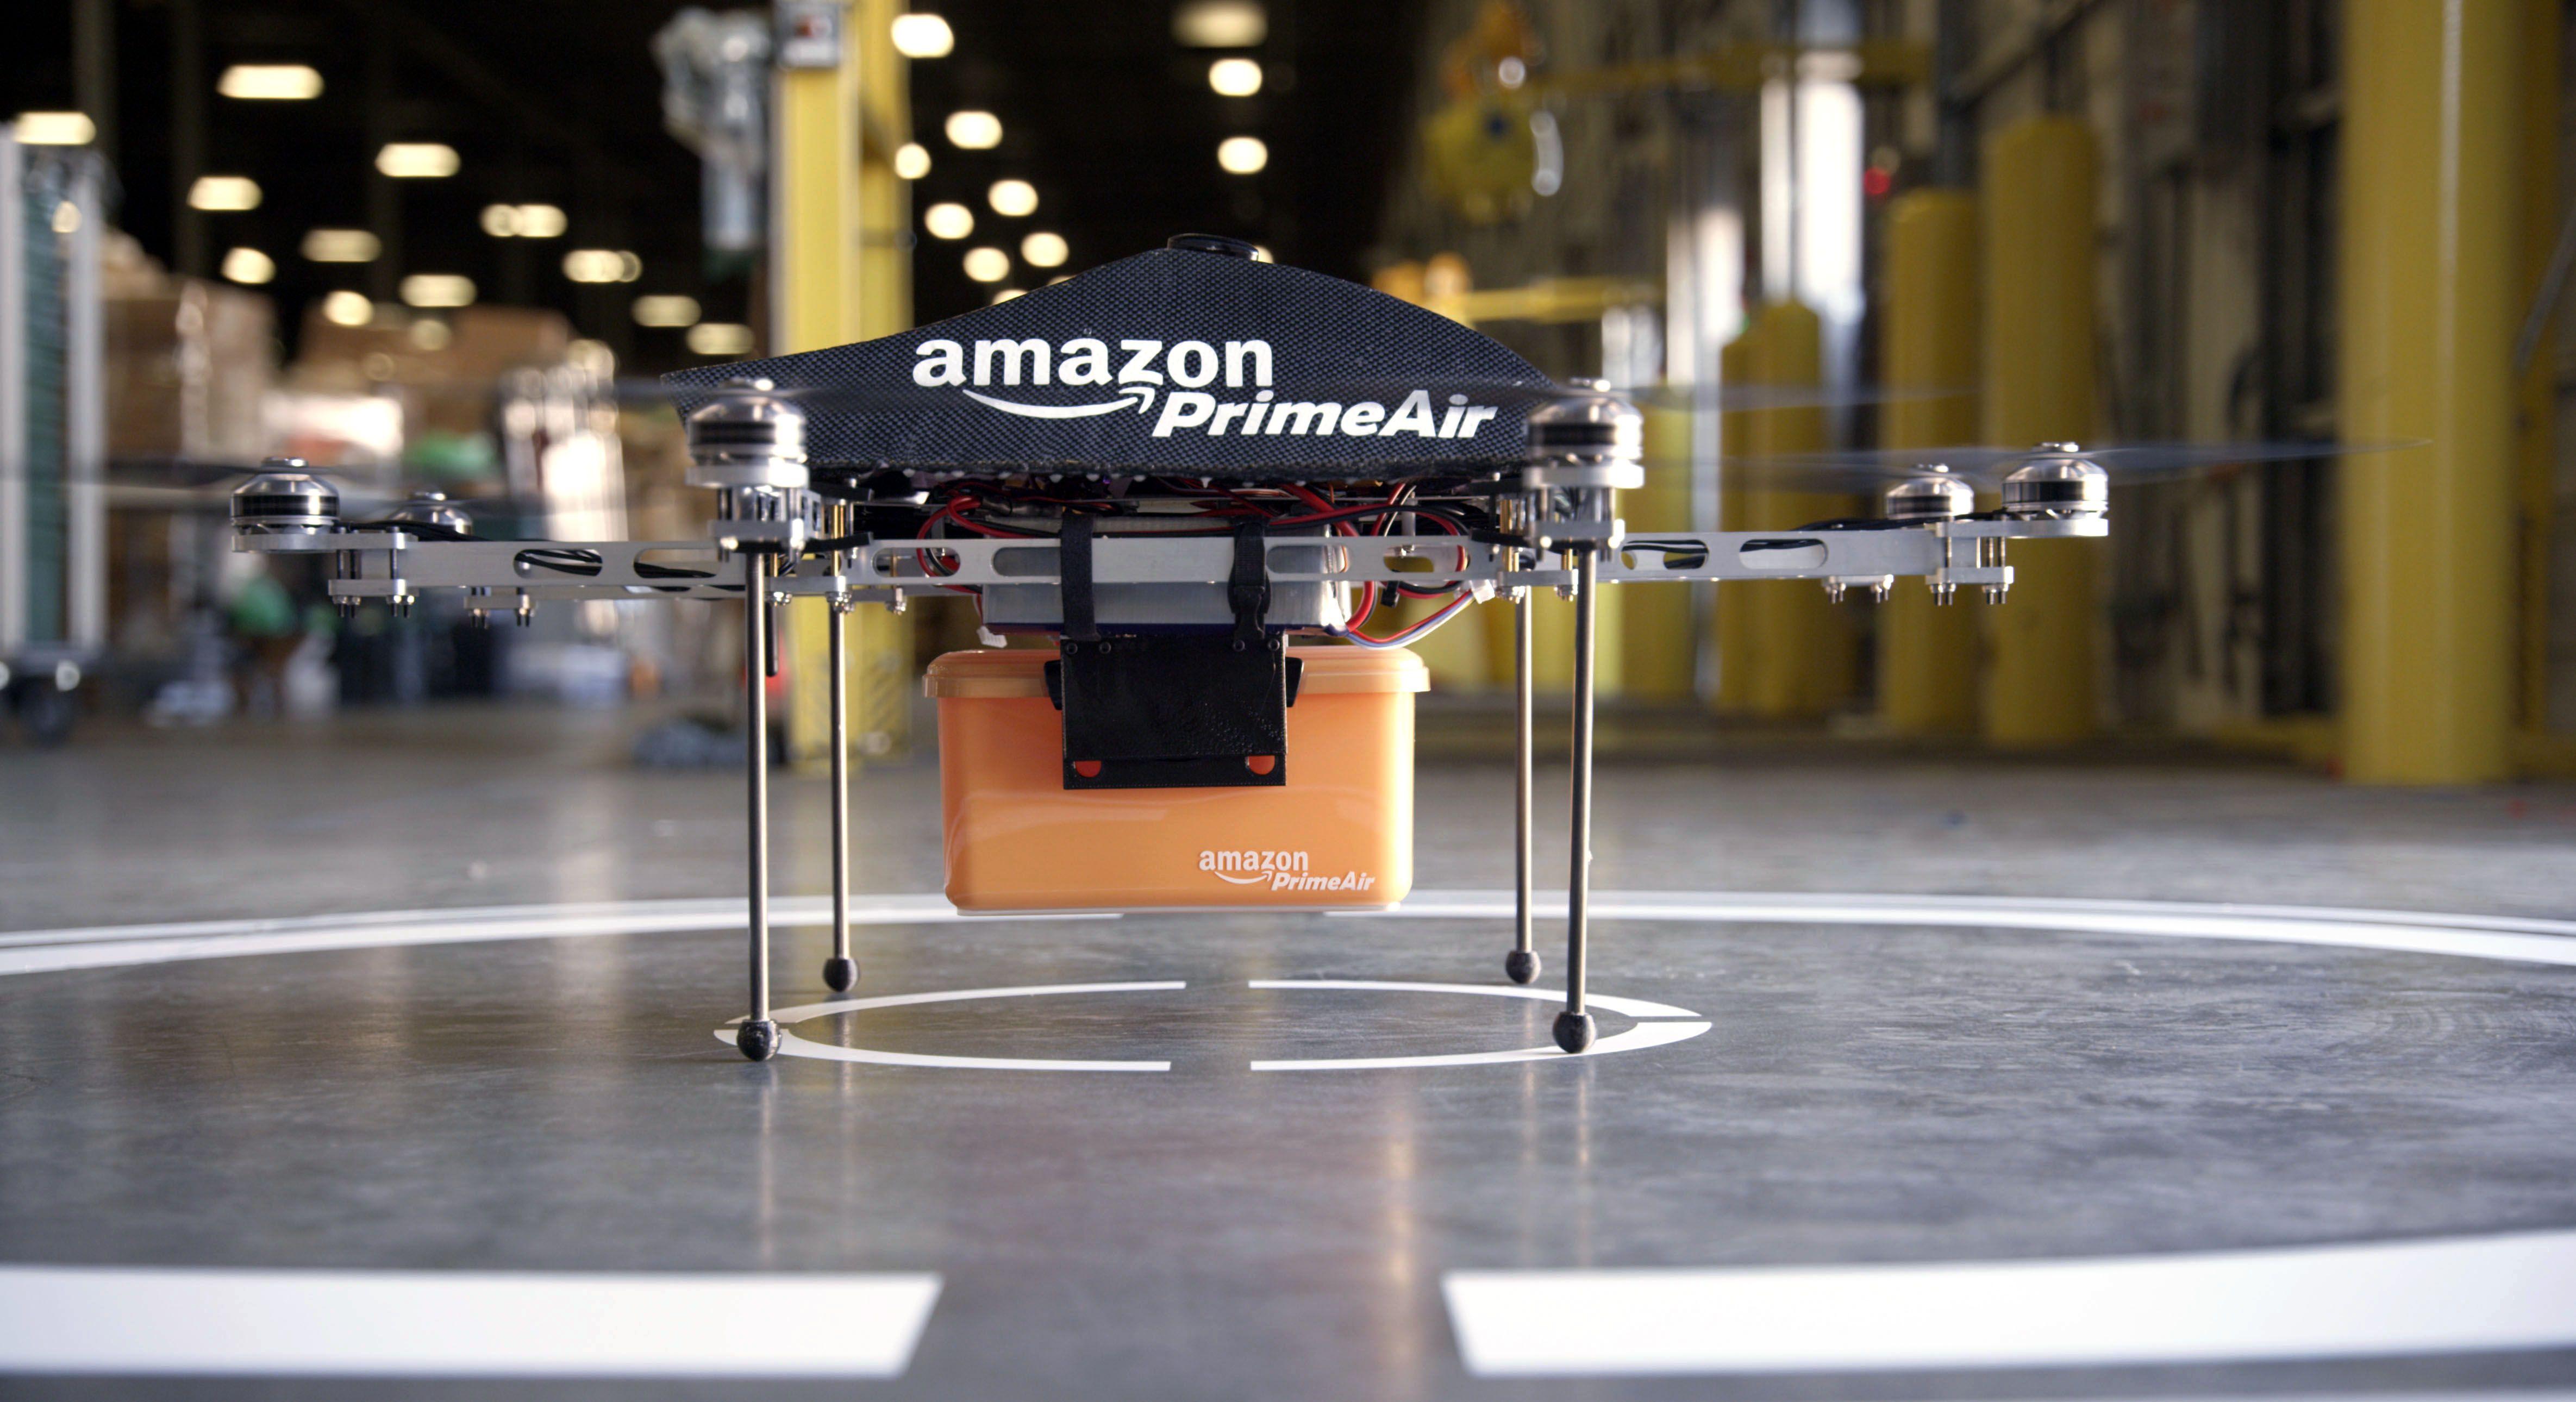 Amazon Prime Air Logo - Amazon Details How Its Drone Delivery Service Will Work